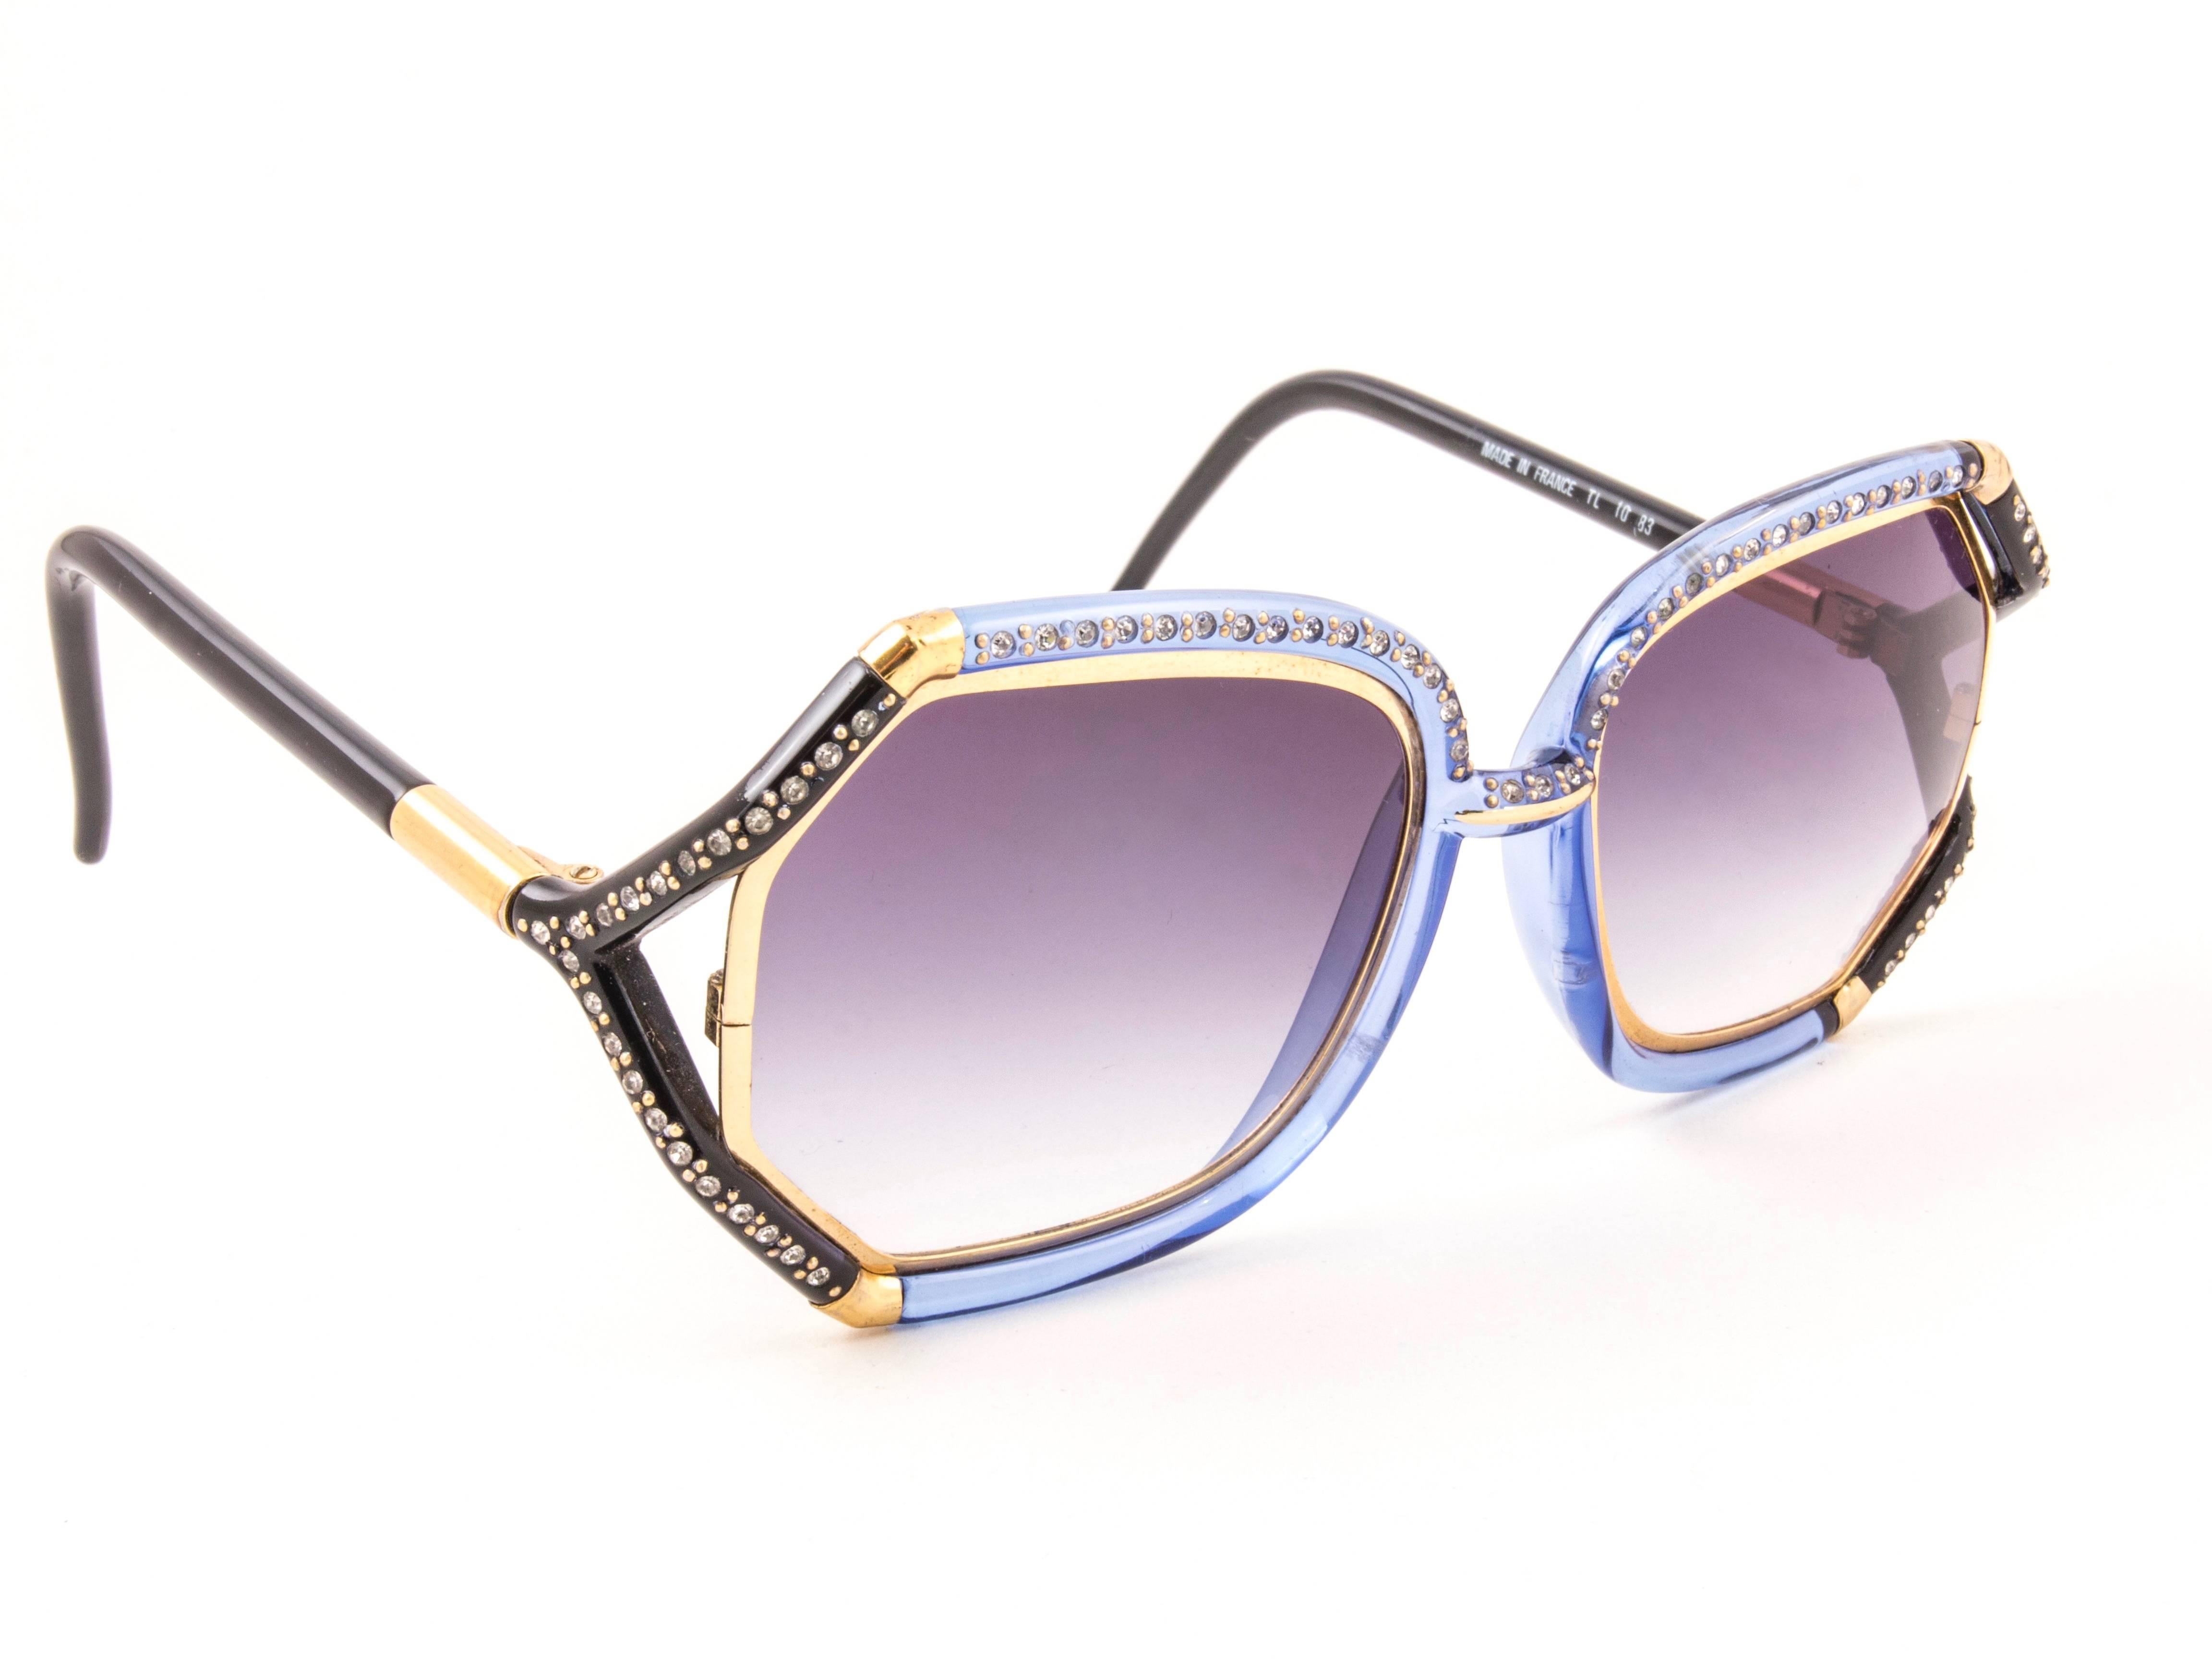 New Vintage Ted Lapidus TL 10 83 Strass accents over translucent blue & gold frame with spotless blue gradient lenses.  
Made in Paris.  
Produced and design in 1970's.  
New, never worn or displayed.